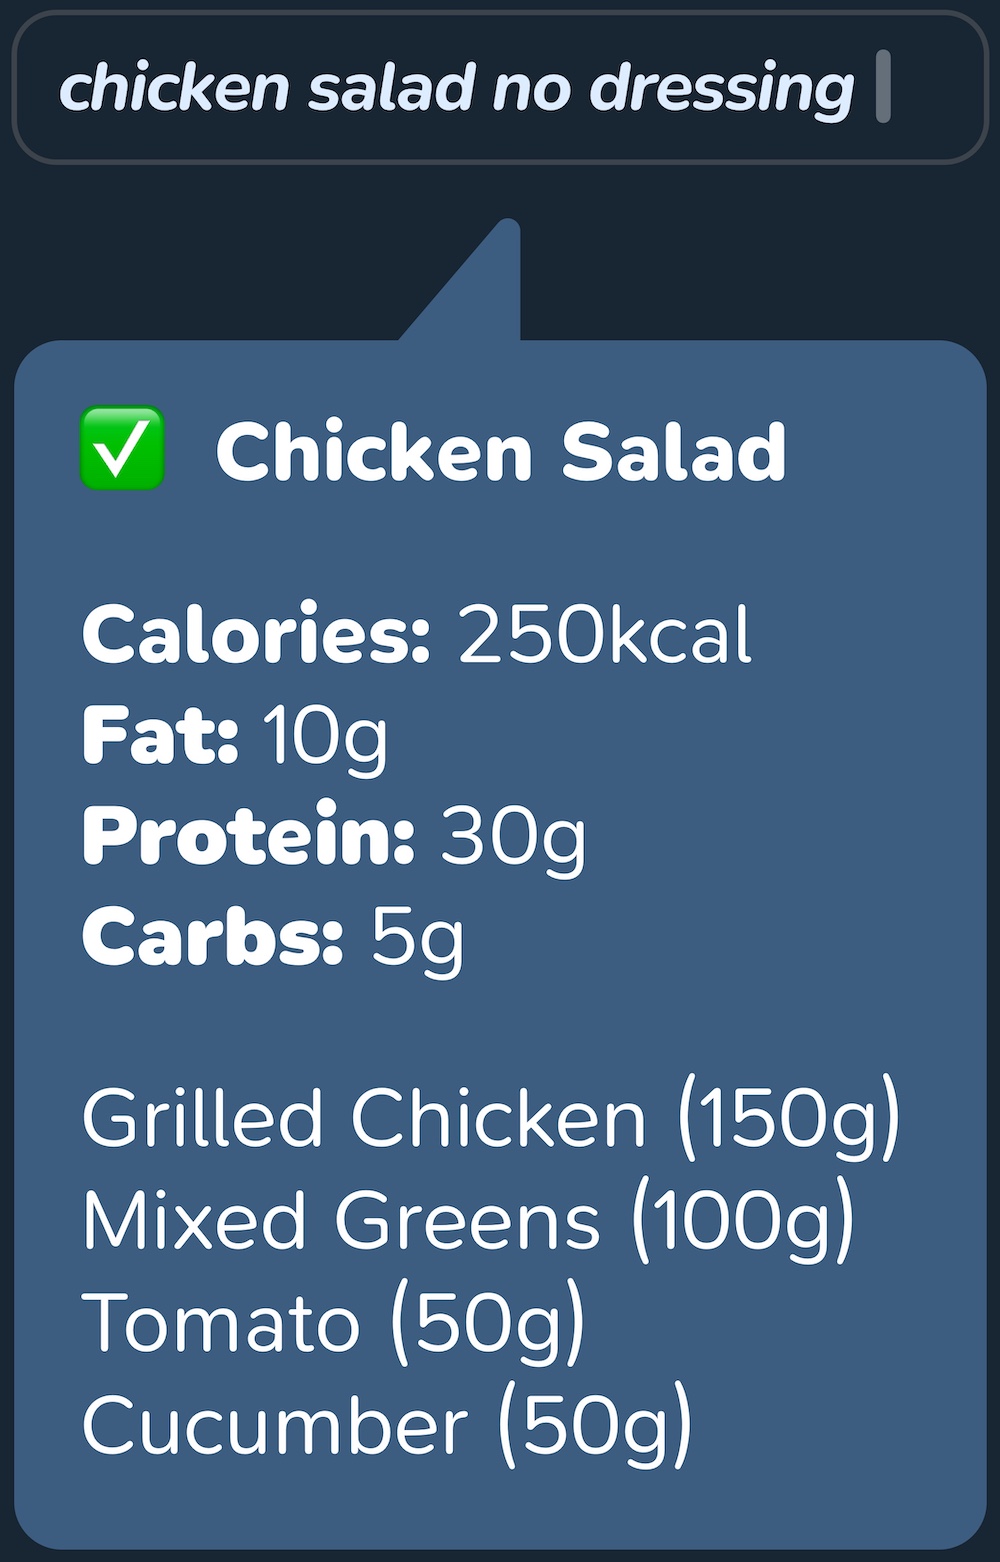 Manually writing chicken salad no dressing to the chat bot and getting back calories, macros and ingredients.